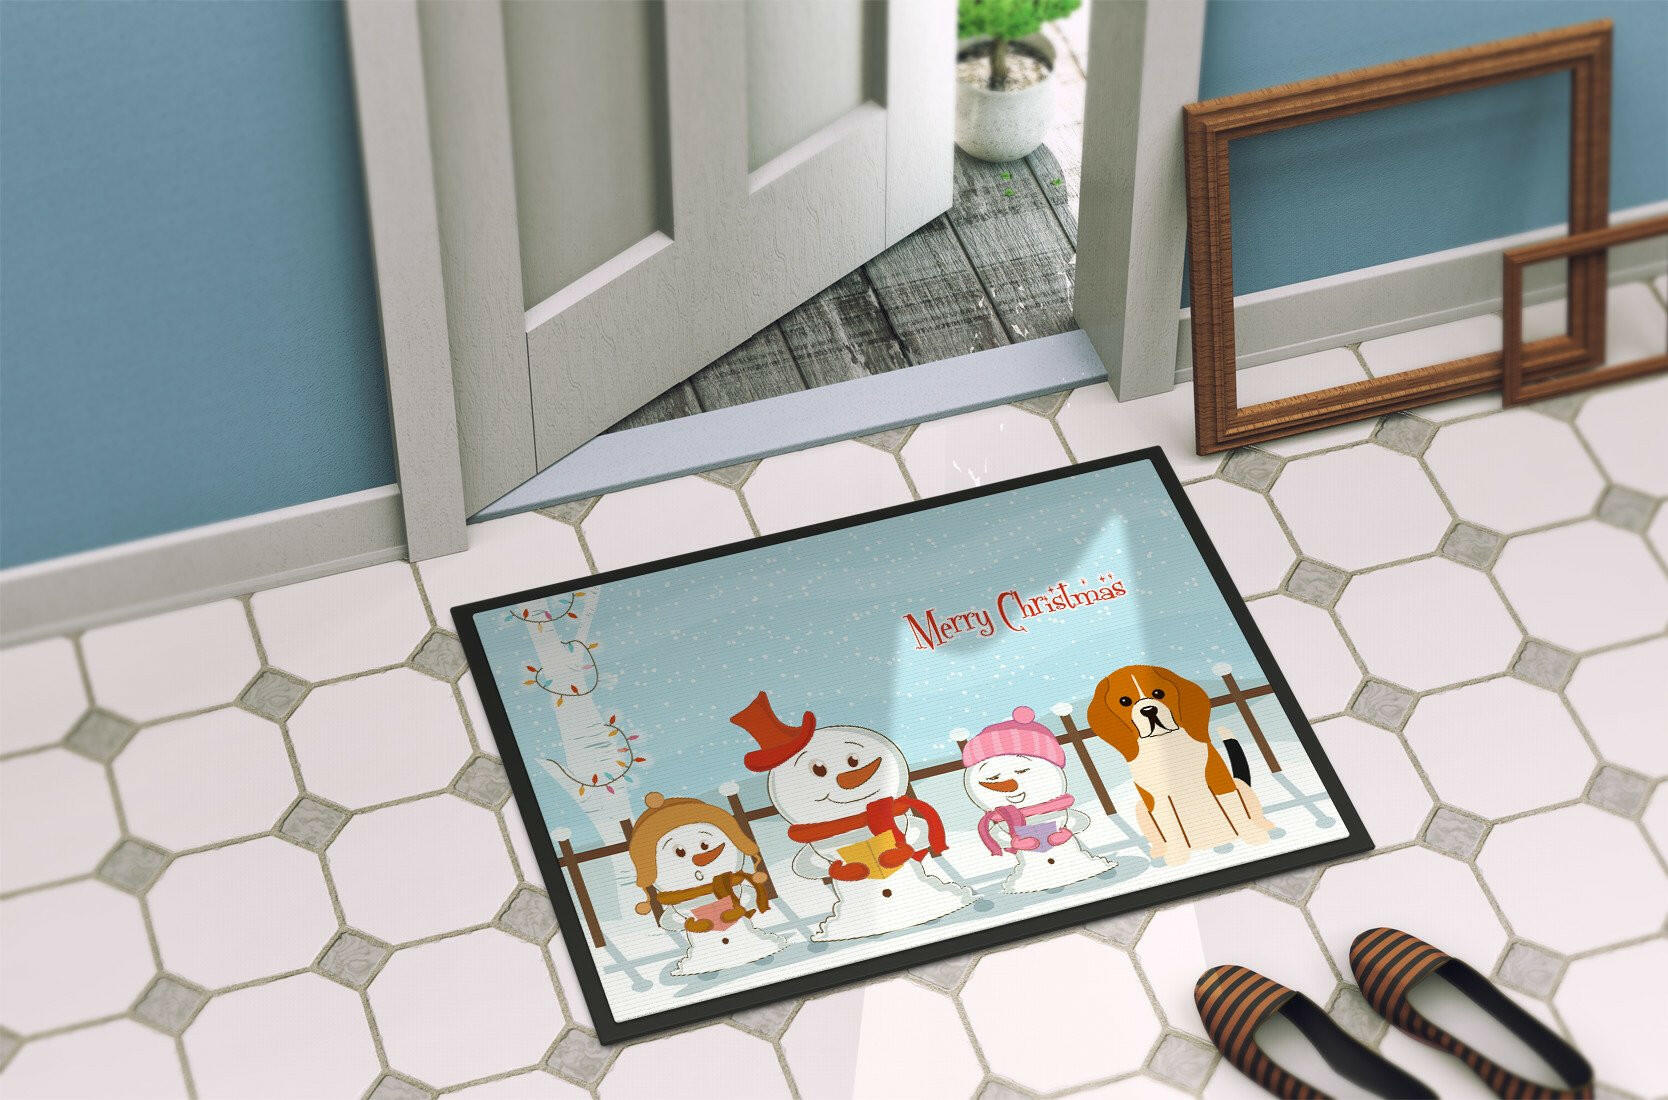 Merry Christmas Carolers Beagle Tricolor Indoor or Outdoor Mat 24x36 BB2371JMAT - the-store.com